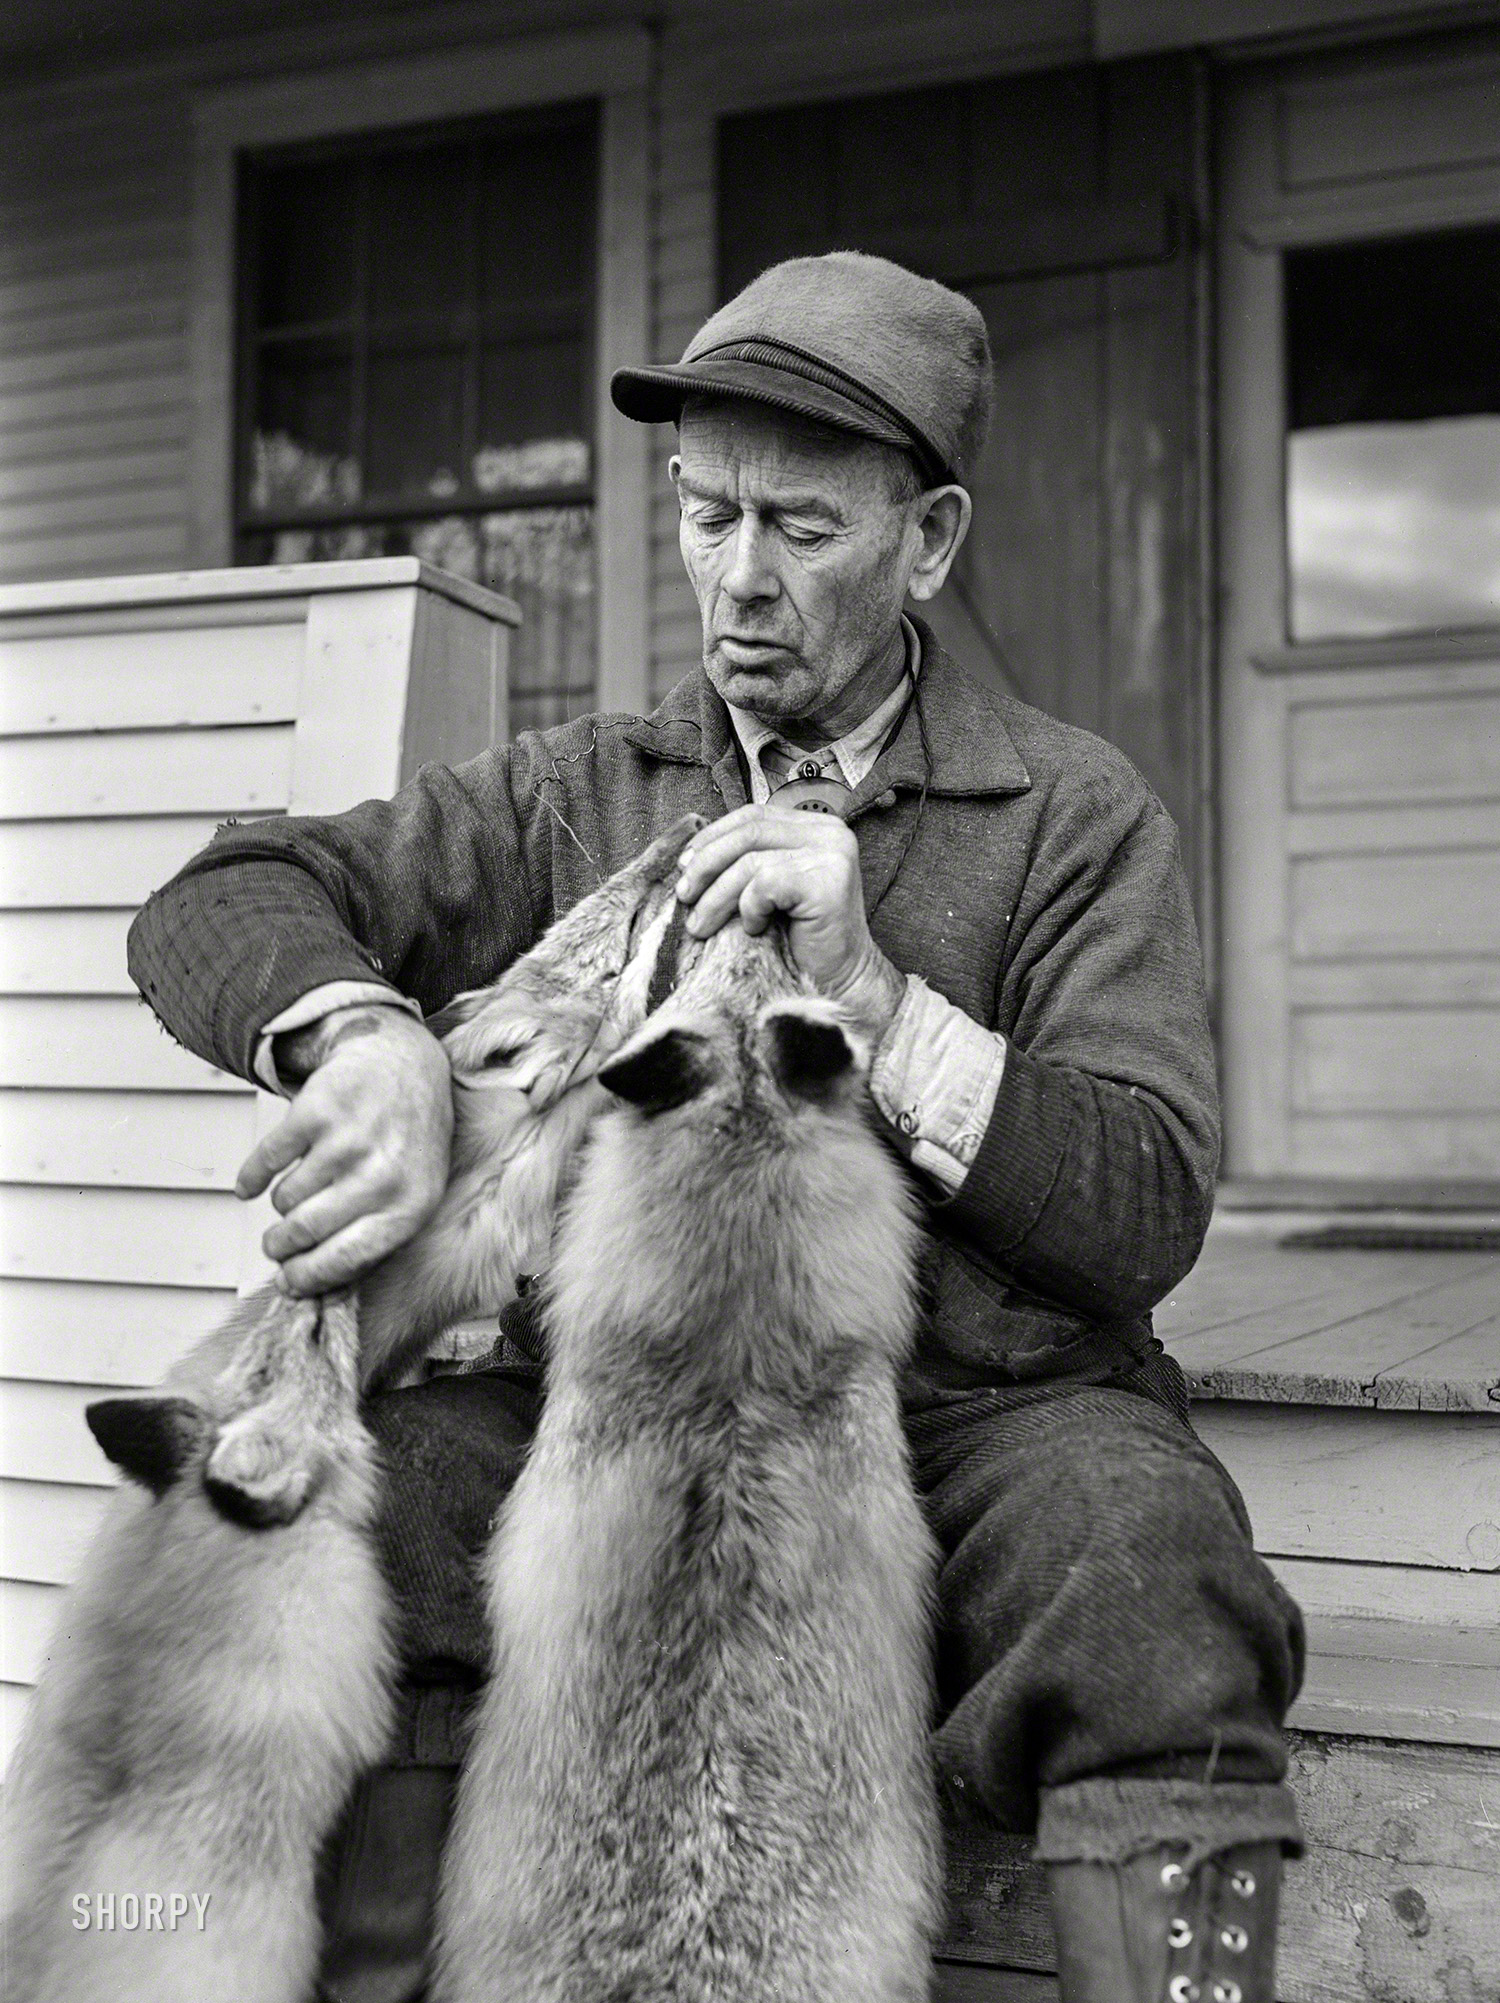 December 1941. "Perley Mosley with three pelts from foxes he trapped. Eden Mills, Vermont." Photo by Arthur Rothstein, Office of War Information. View full size.